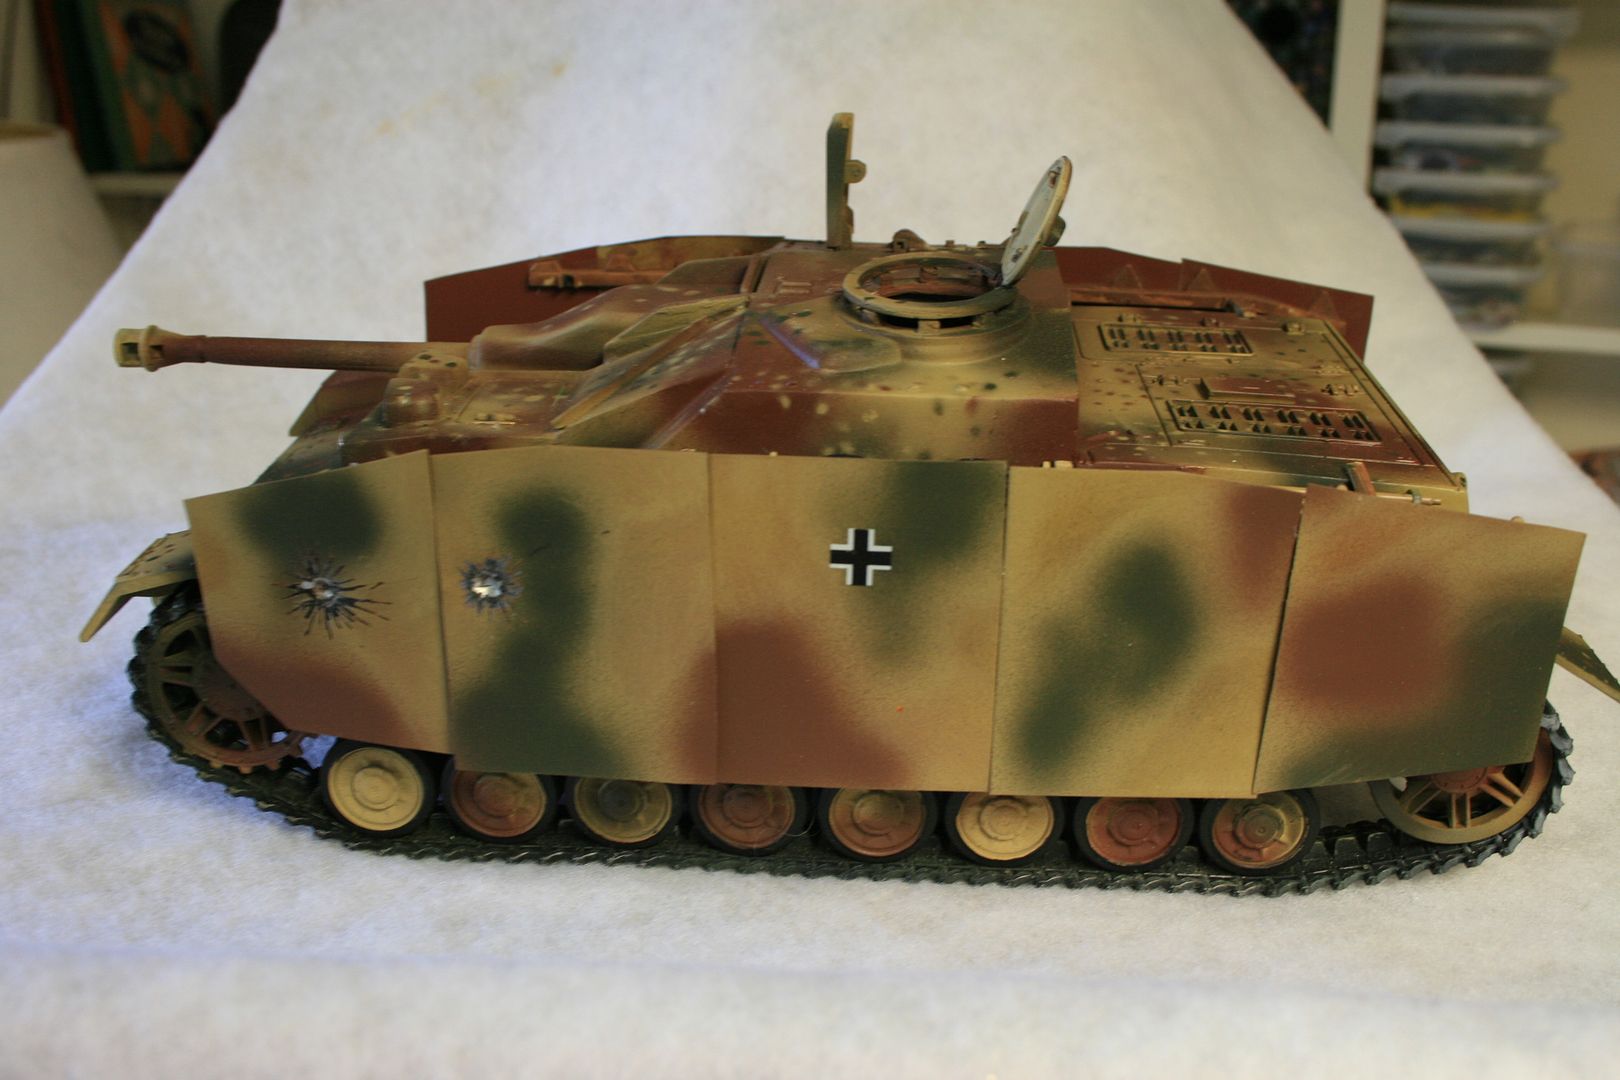 Stug IV coming soon - Page 4 - Small Scale Military Headquarters